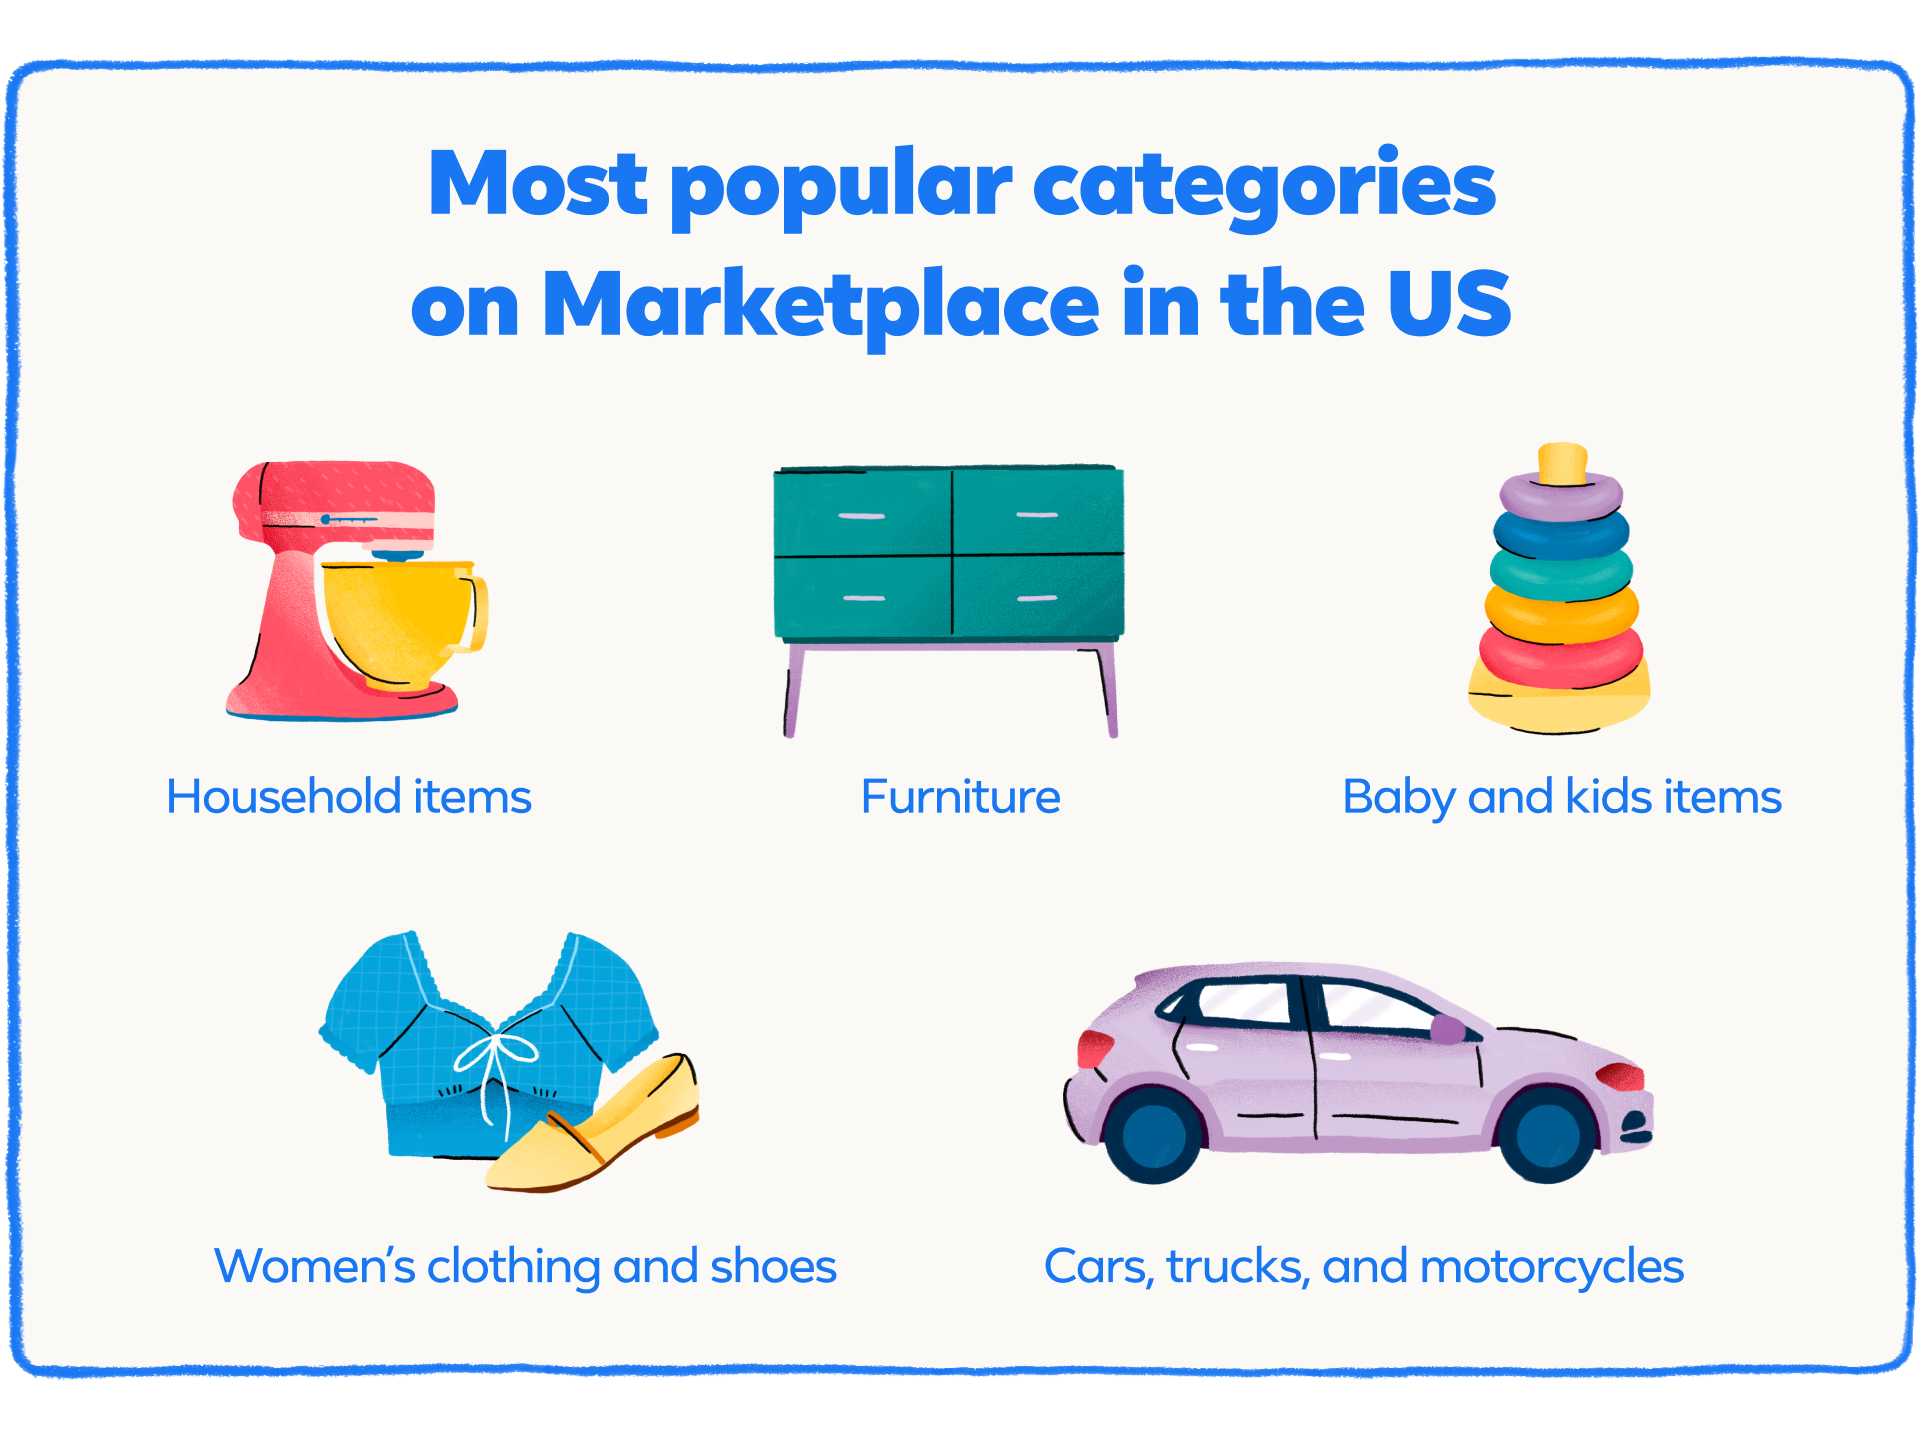 Most popular categories on Marketplace in the US